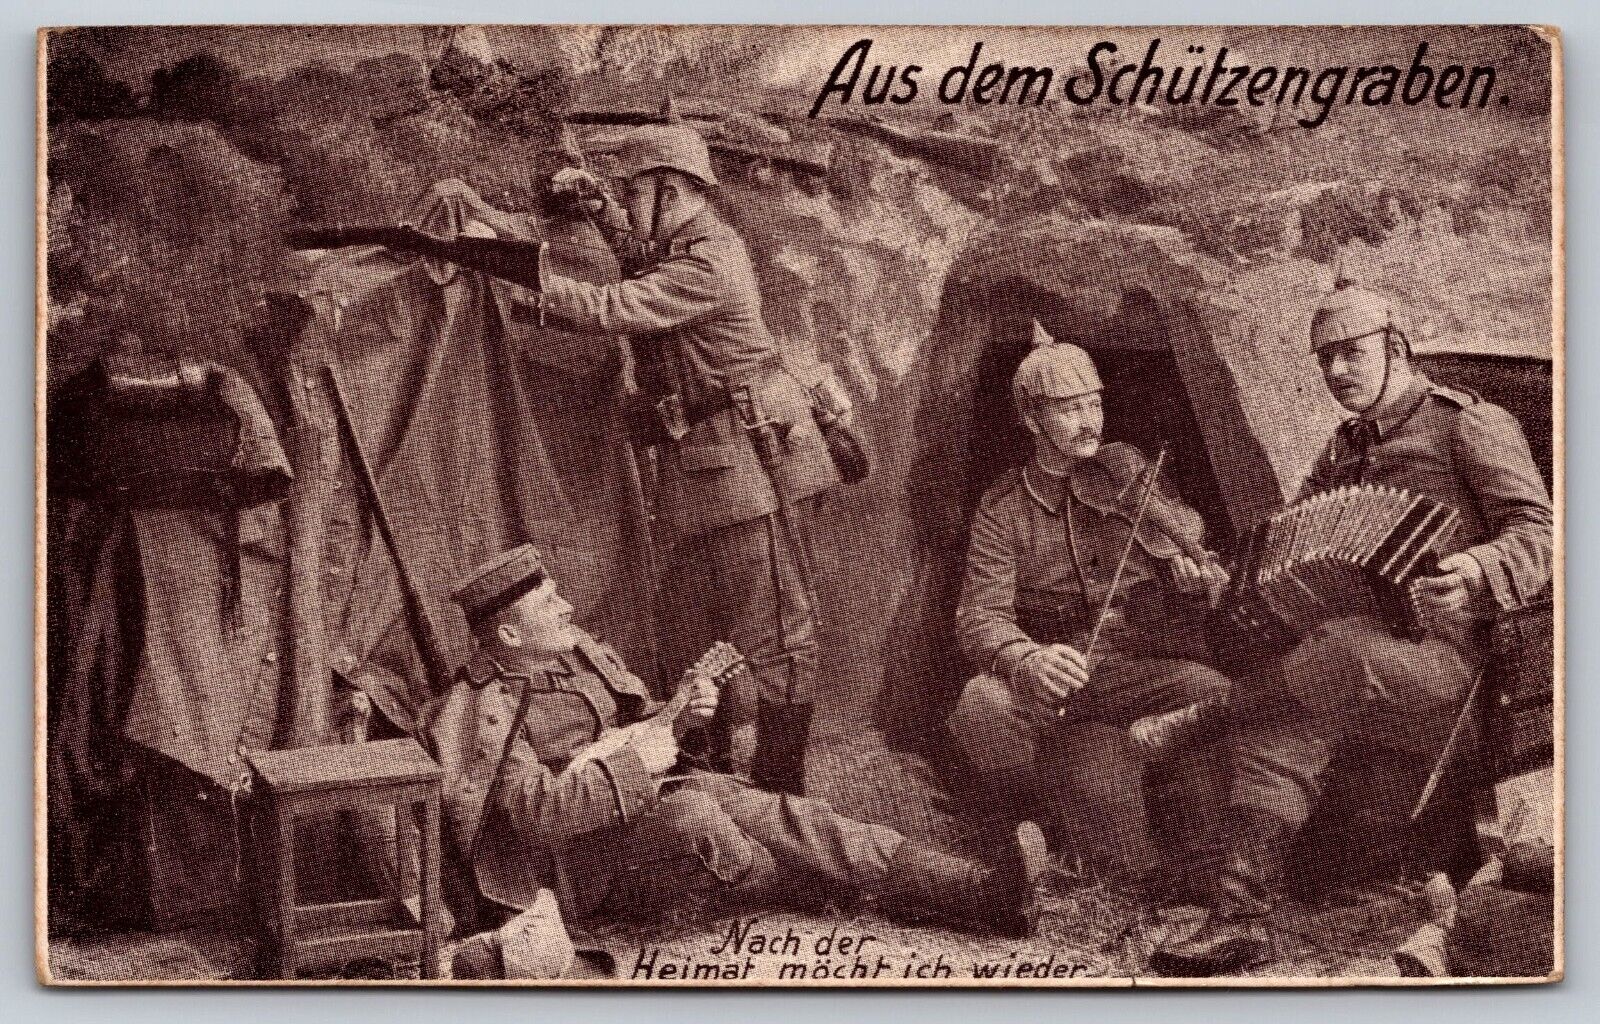 WW1 Era German Postcard from the trenches and wish I was home